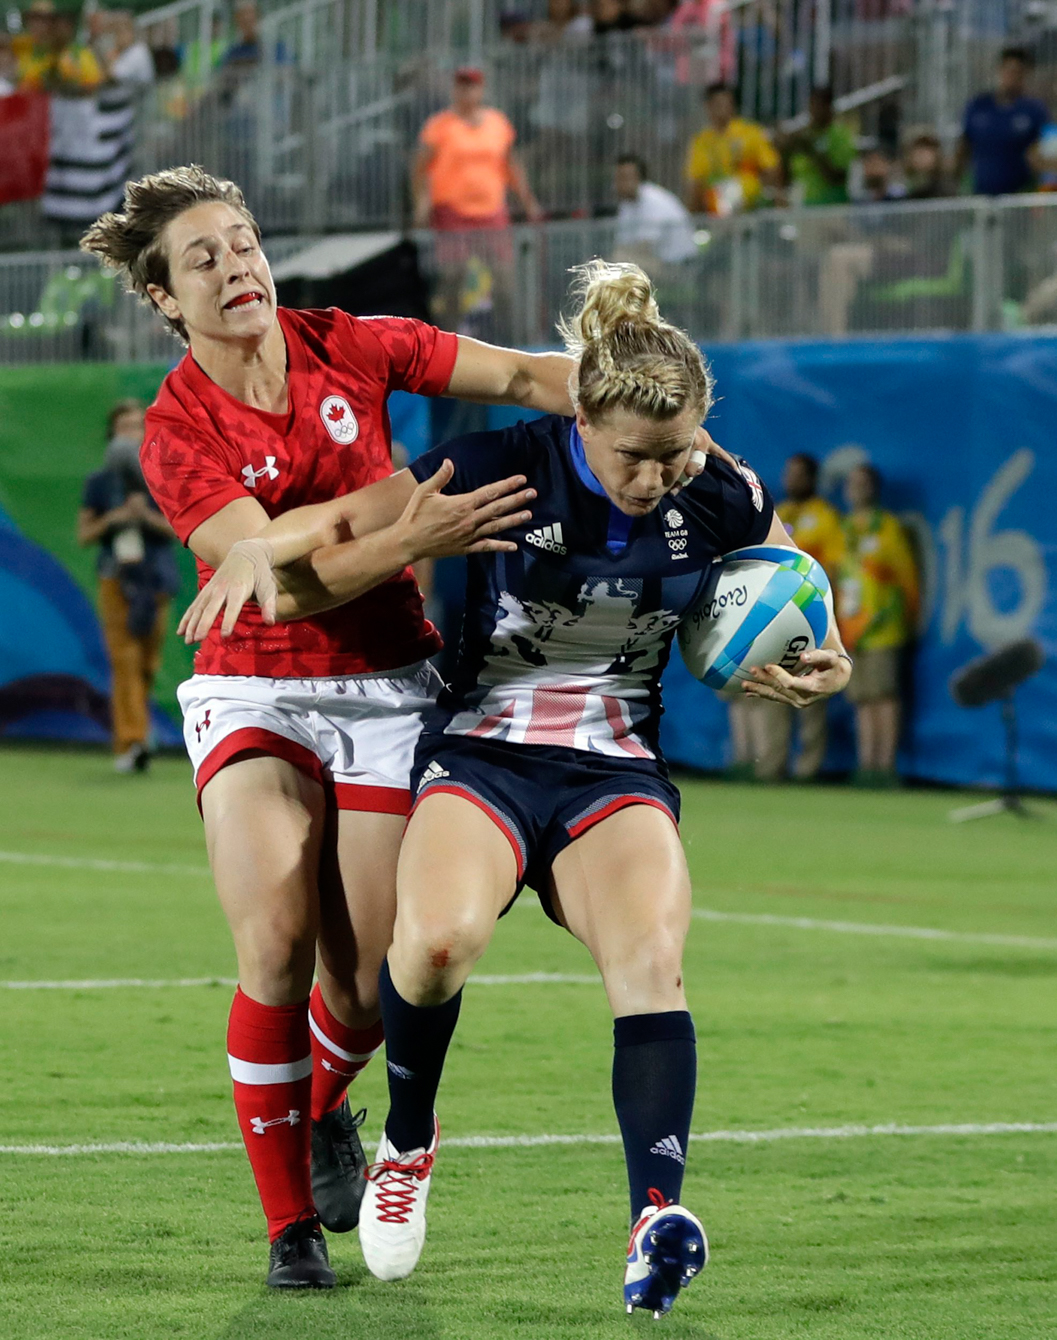 Great Britain's Danielle Waterman, right, avoids a tackle from Canada's Ghislaine Landry, to score a try during the women's rugby sevens bronze medal match at the Summer Olympics in Rio de Janeiro, Brazil, Monday, Aug. 8, 2016. (AP Photo/Themba Hadebe)